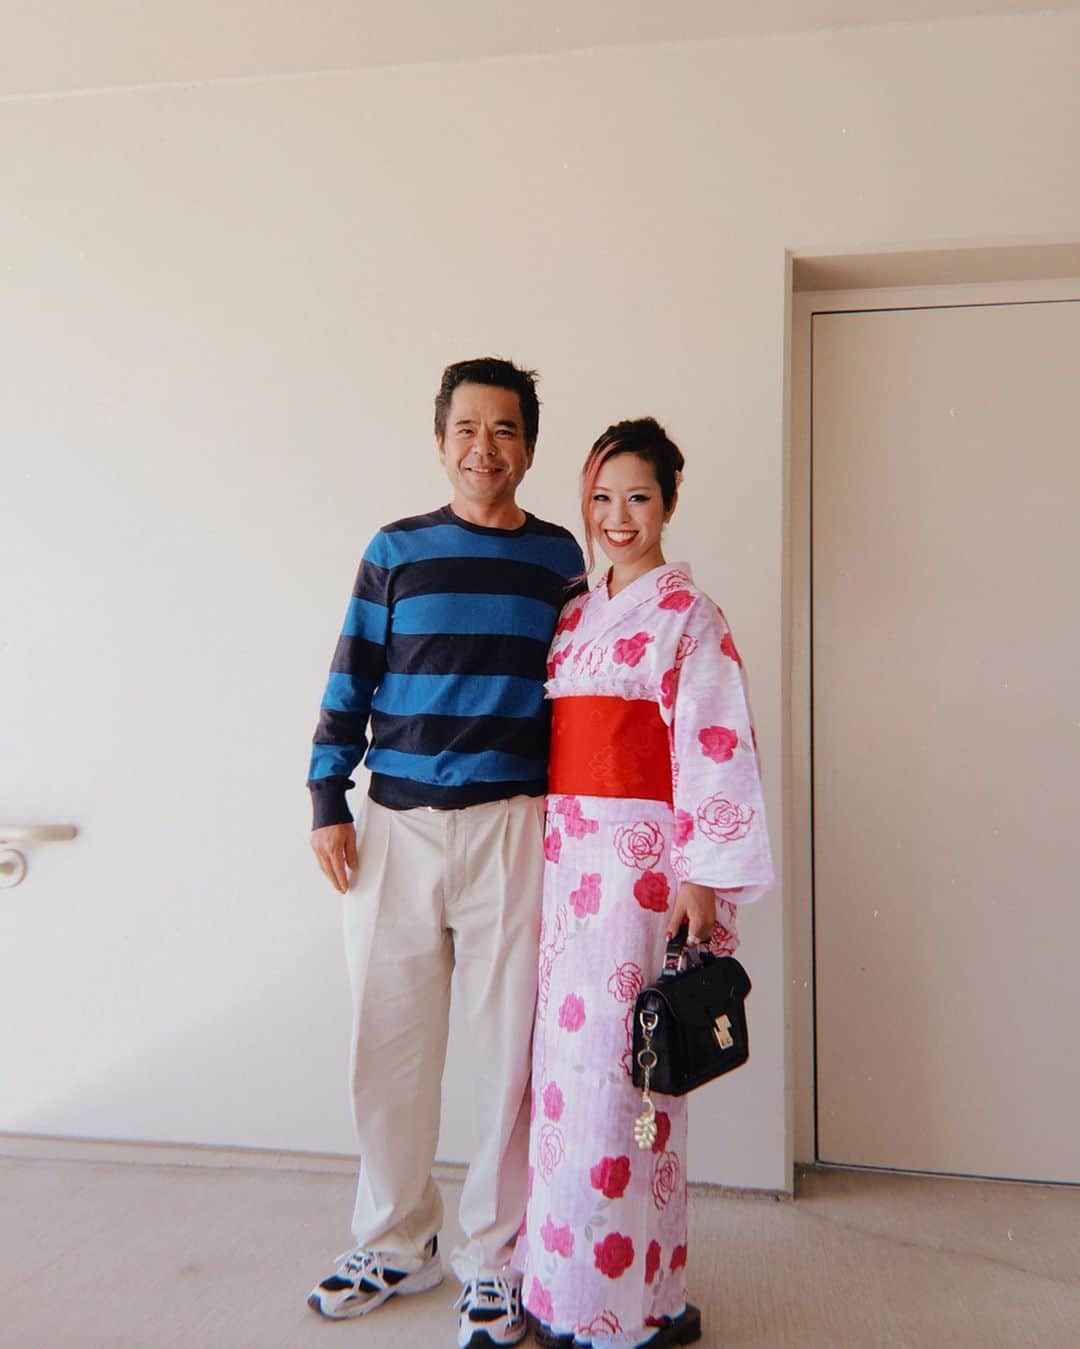 AikA♡ • 愛香 | JP Blogger • ブロガーさんのインスタグラム写真 - (AikA♡ • 愛香 | JP Blogger • ブロガーInstagram)「Happy Father’s Day to my amazing DAD!!!! You became a father at 23 and ever since you’ve been working so hard for our family and you’ve been such great & awesome pops 🖤 Thank you so much for all your dedication to your children over yourself and everything! You were always at my elementary schools’ events even when there was only dad ( that’s you papa! ) surrounded by many of mothers in the class!! I was such a proud Lil girl to have such caring & supportive dad like you!! My childhood was full of great memories thanks to you 😭💗 I cannot wait for the day to come when I will be walking down the aisle with you 👰🏼👨🏻✨ So so so proud to be your daughter and I love you tons ♥️🥰 P.S. Now you see why I am a goofball 😂 Keep swiping left to the 6th pic! ————— 父の日おめでとう💐 パパさん！ 23歳の時にお父さんになってそれからずっと家族のために働いてくれて、いつも素敵なお父さんでいてくれてありがとうネ🖤  自分の事や、他のことを差し置いて、いつも子供達の幸せ、笑顔を想ってくれて、お父さんのお陰であたしの子供の頃の思い出ゎ素敵な思い出でたくさんだよ！☺️ 周りゎみんなお母さん達ばっかりの授業参観でも、父親陣一人でも来てくれて、運動会も6年間必ず来てくれて、小さいながらに、とっても誇らしかったよっ💫 本当にありがとぉ🙏🏻💕 早くバージンロードをパパさんと歩ける日が来るのが楽しみデス👰🏼✨ お父さんの娘でとっても誇りに思うよっ✨大大大好き😘♥️ ===== #Happyfathersday #lovemypops #smileiscontagious #momentsofjoy #daisuki #prouddaughter」6月17日 11時26分 - aikaslovecloset